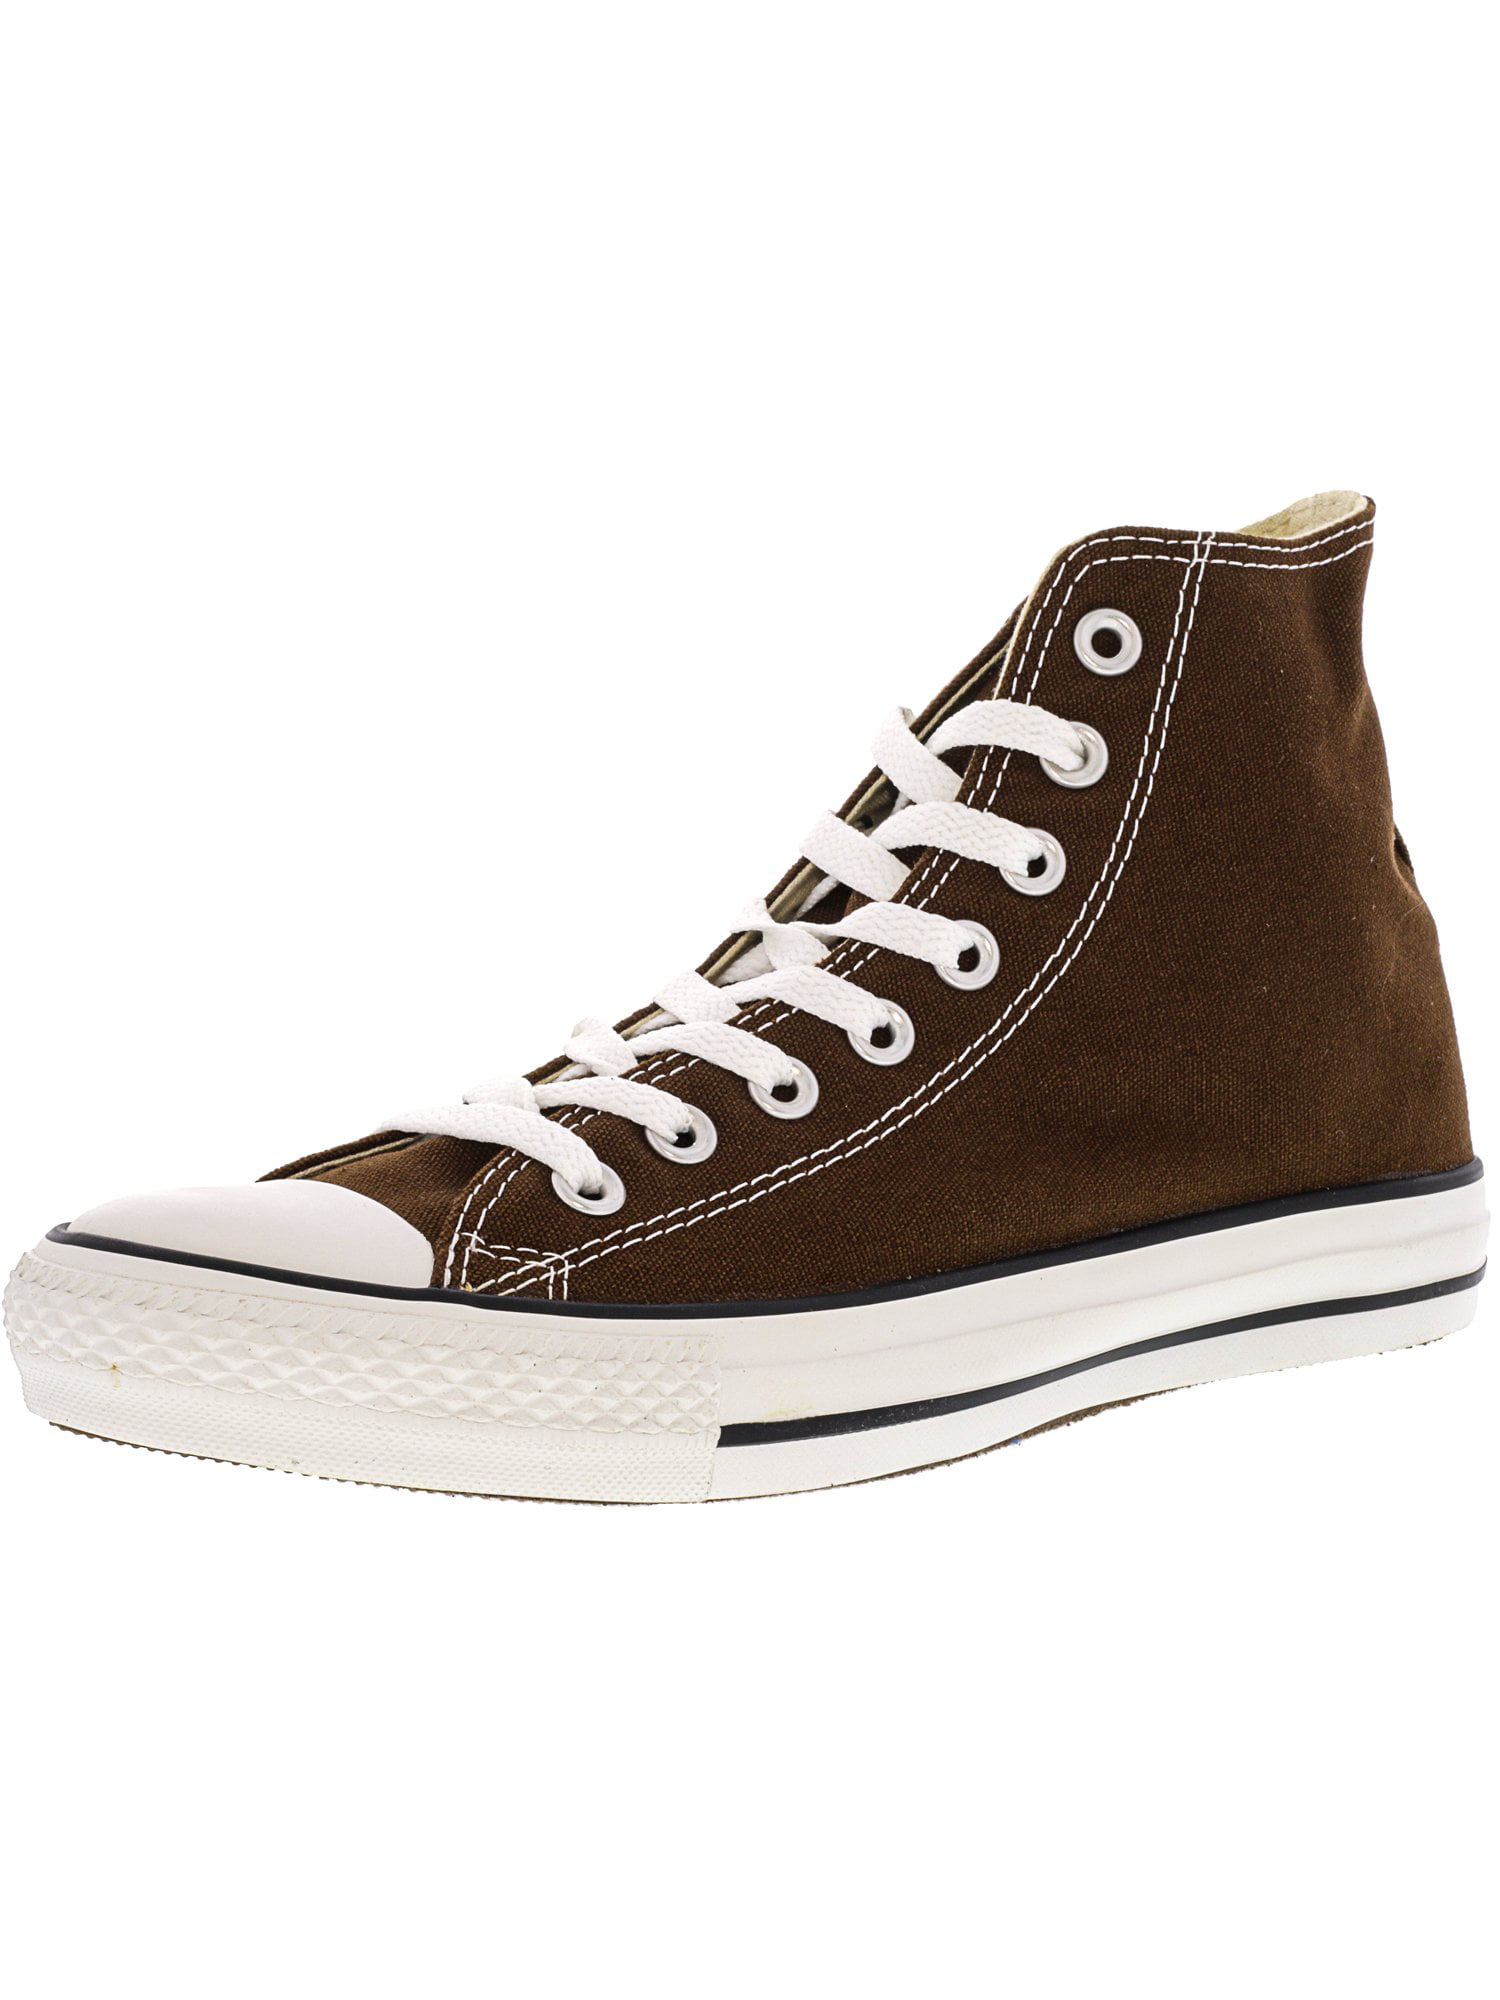 all brown converse